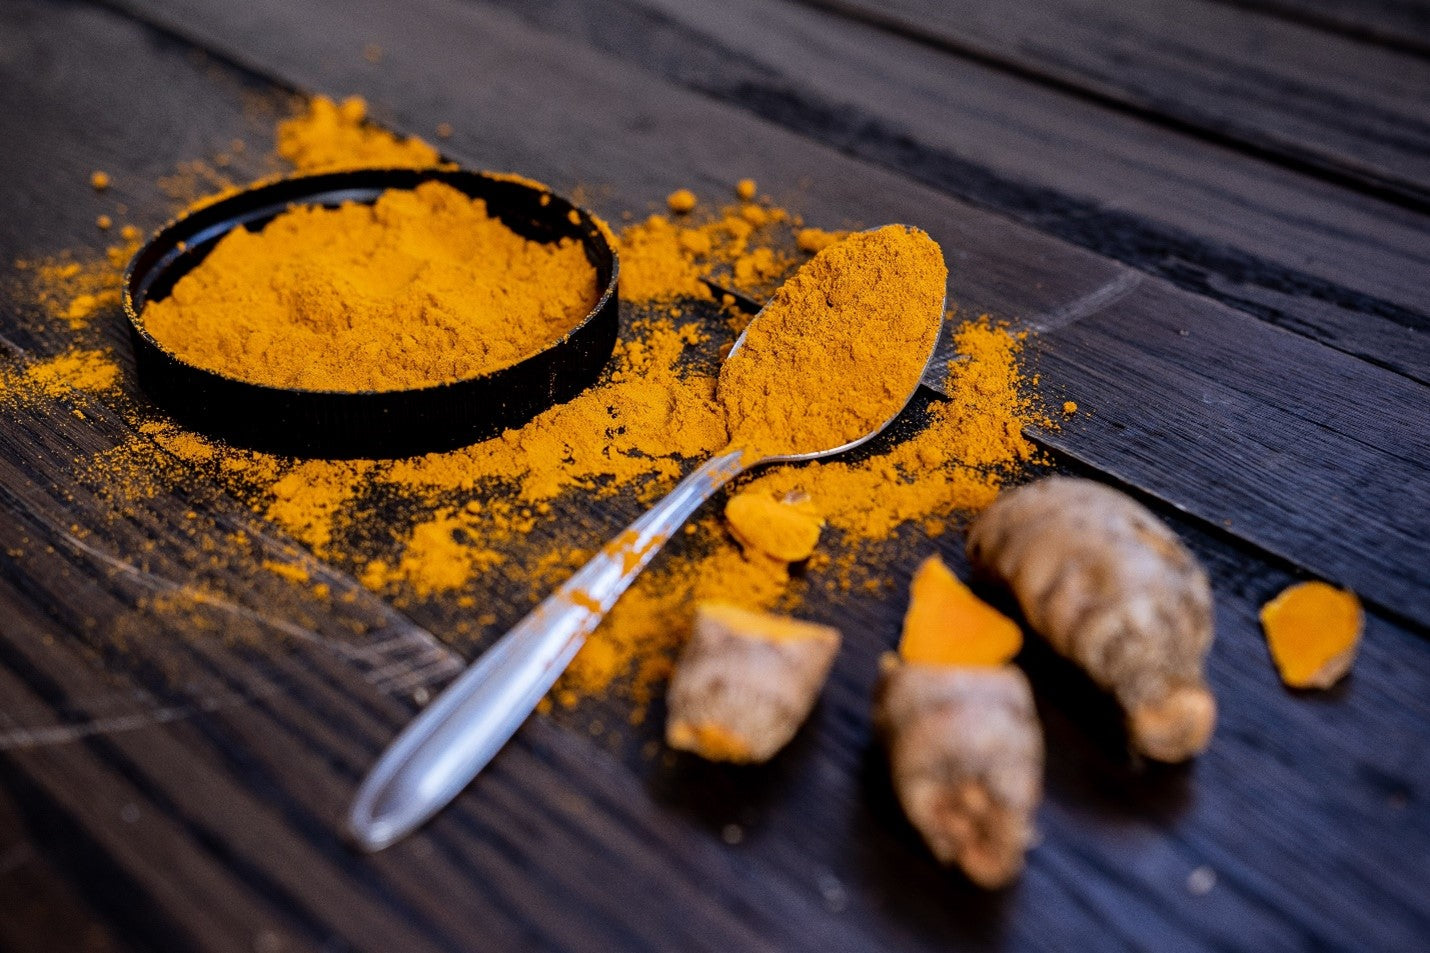 turmeric powder on a spoon and in a lid and turmeric roots